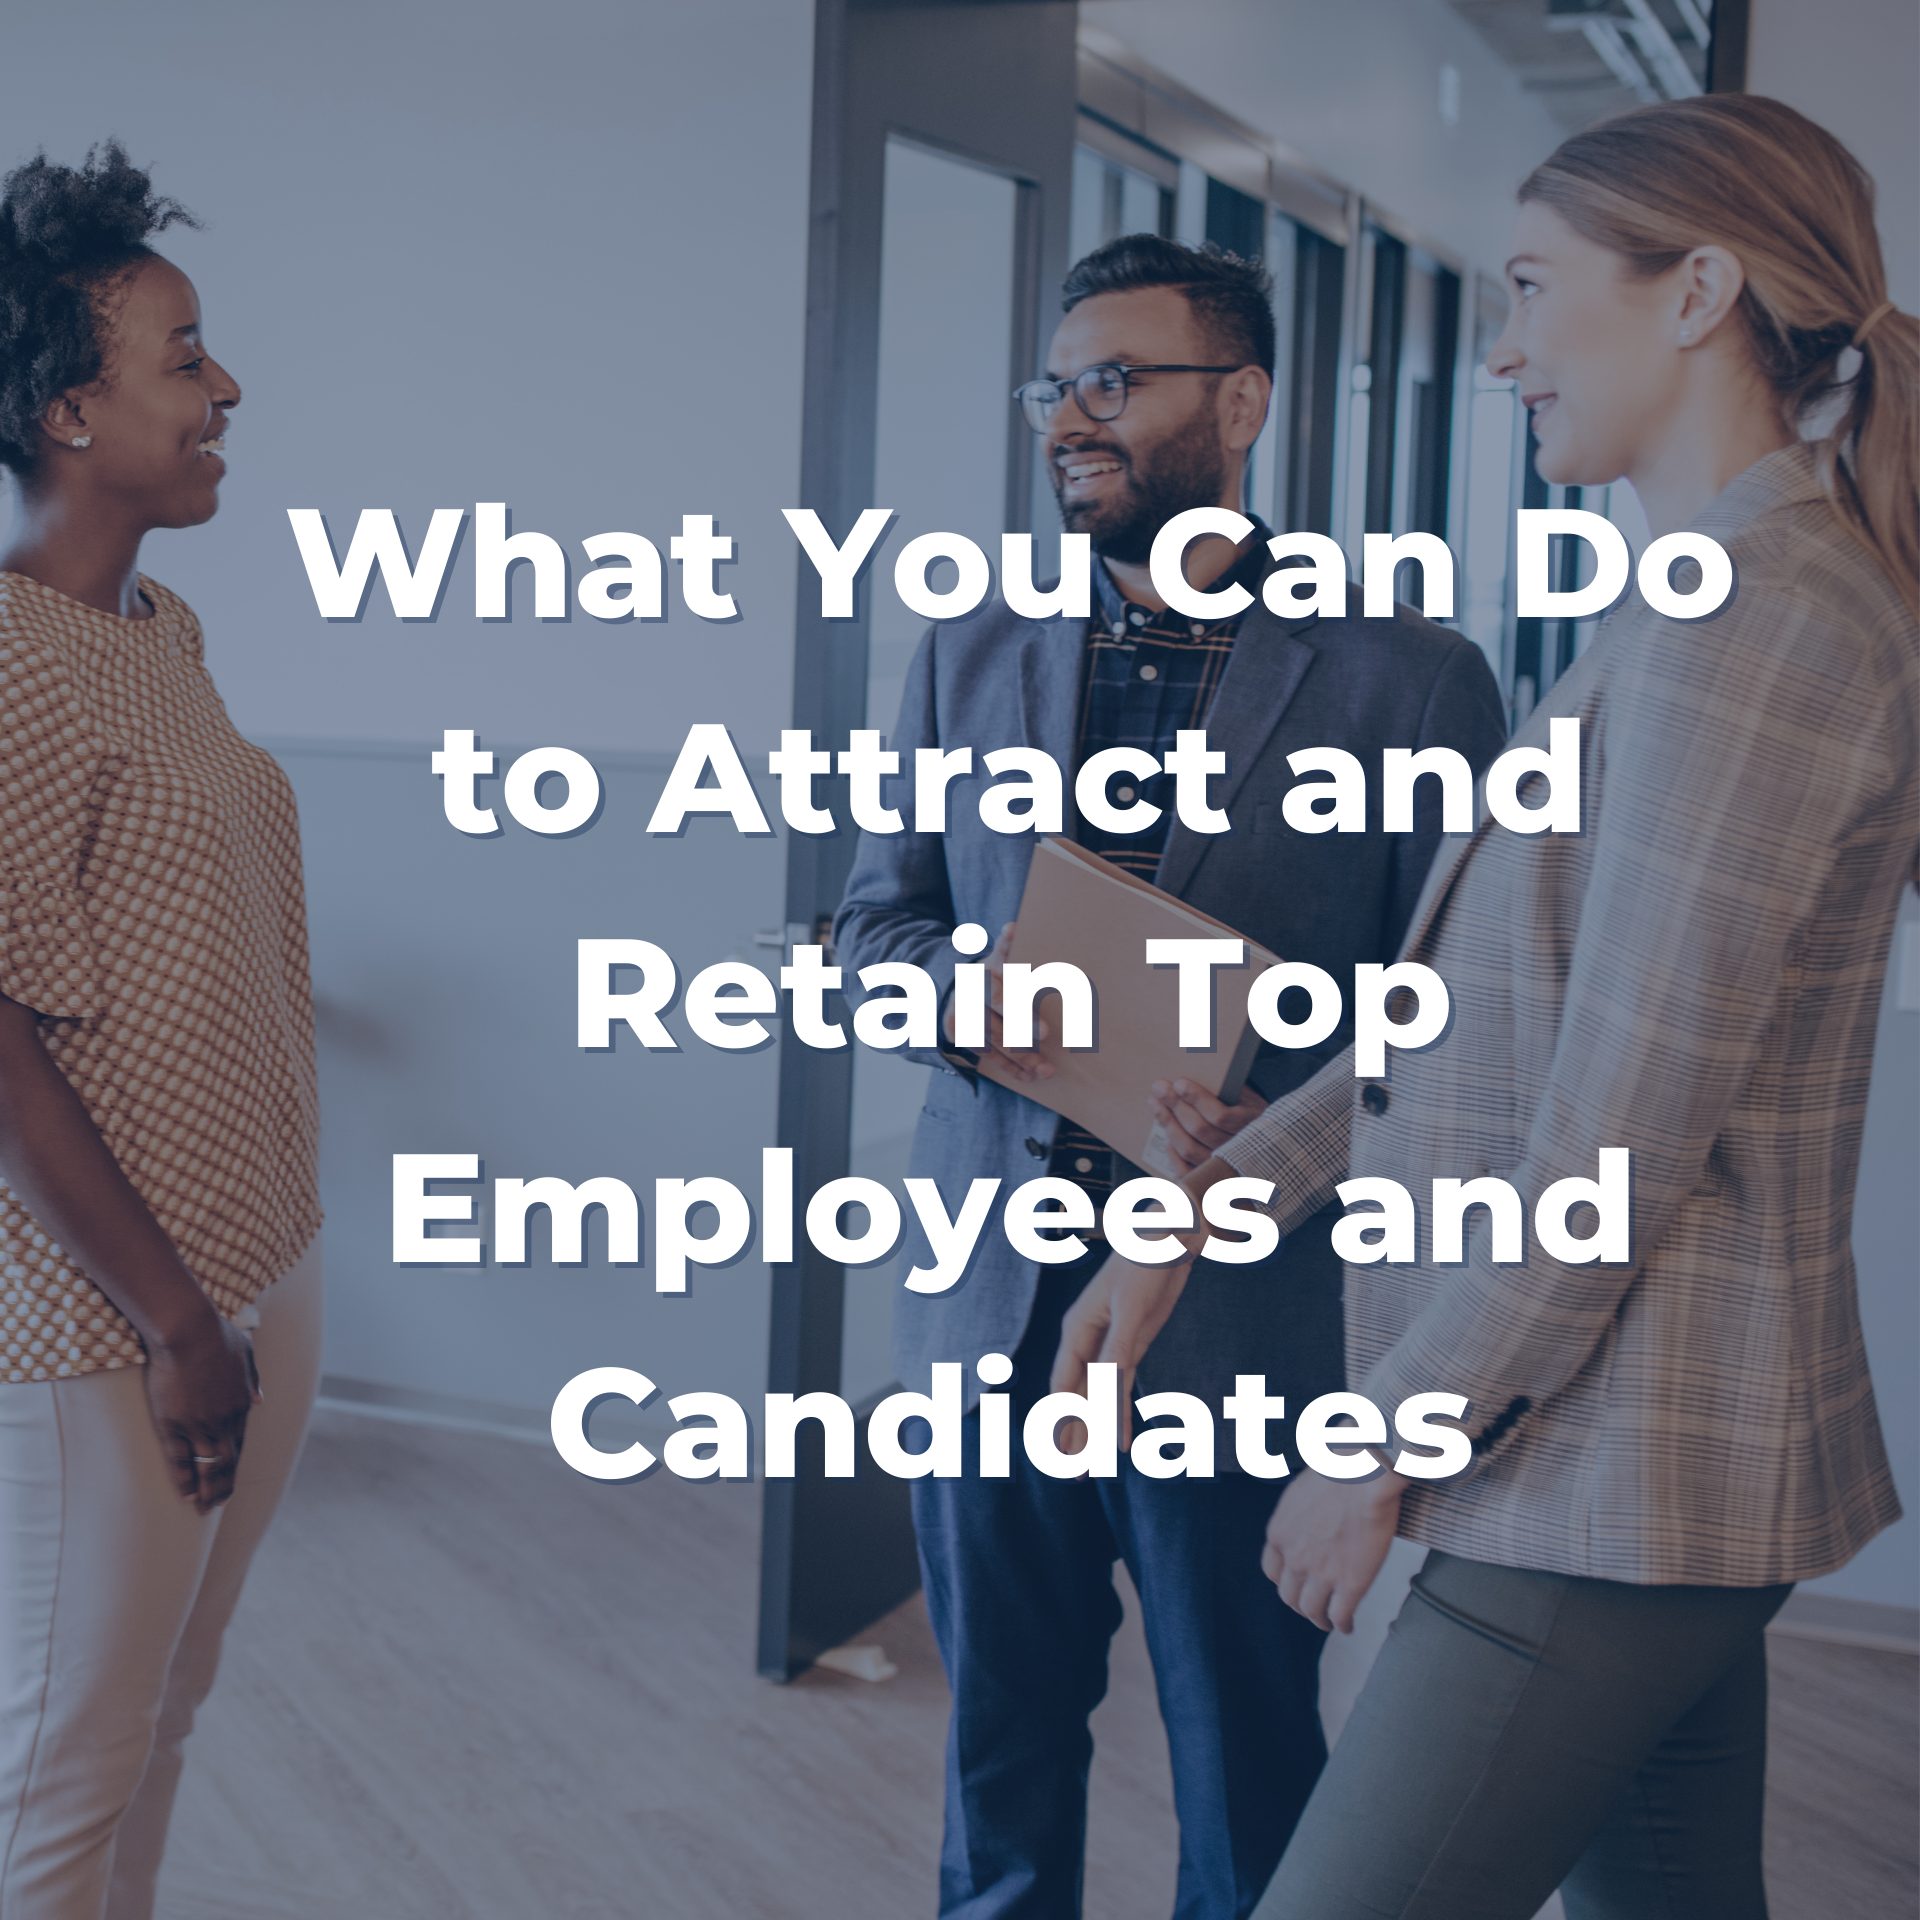 What You Can Do to Retain Your Top Employees OR What You Can Do to Attract Top Candidates